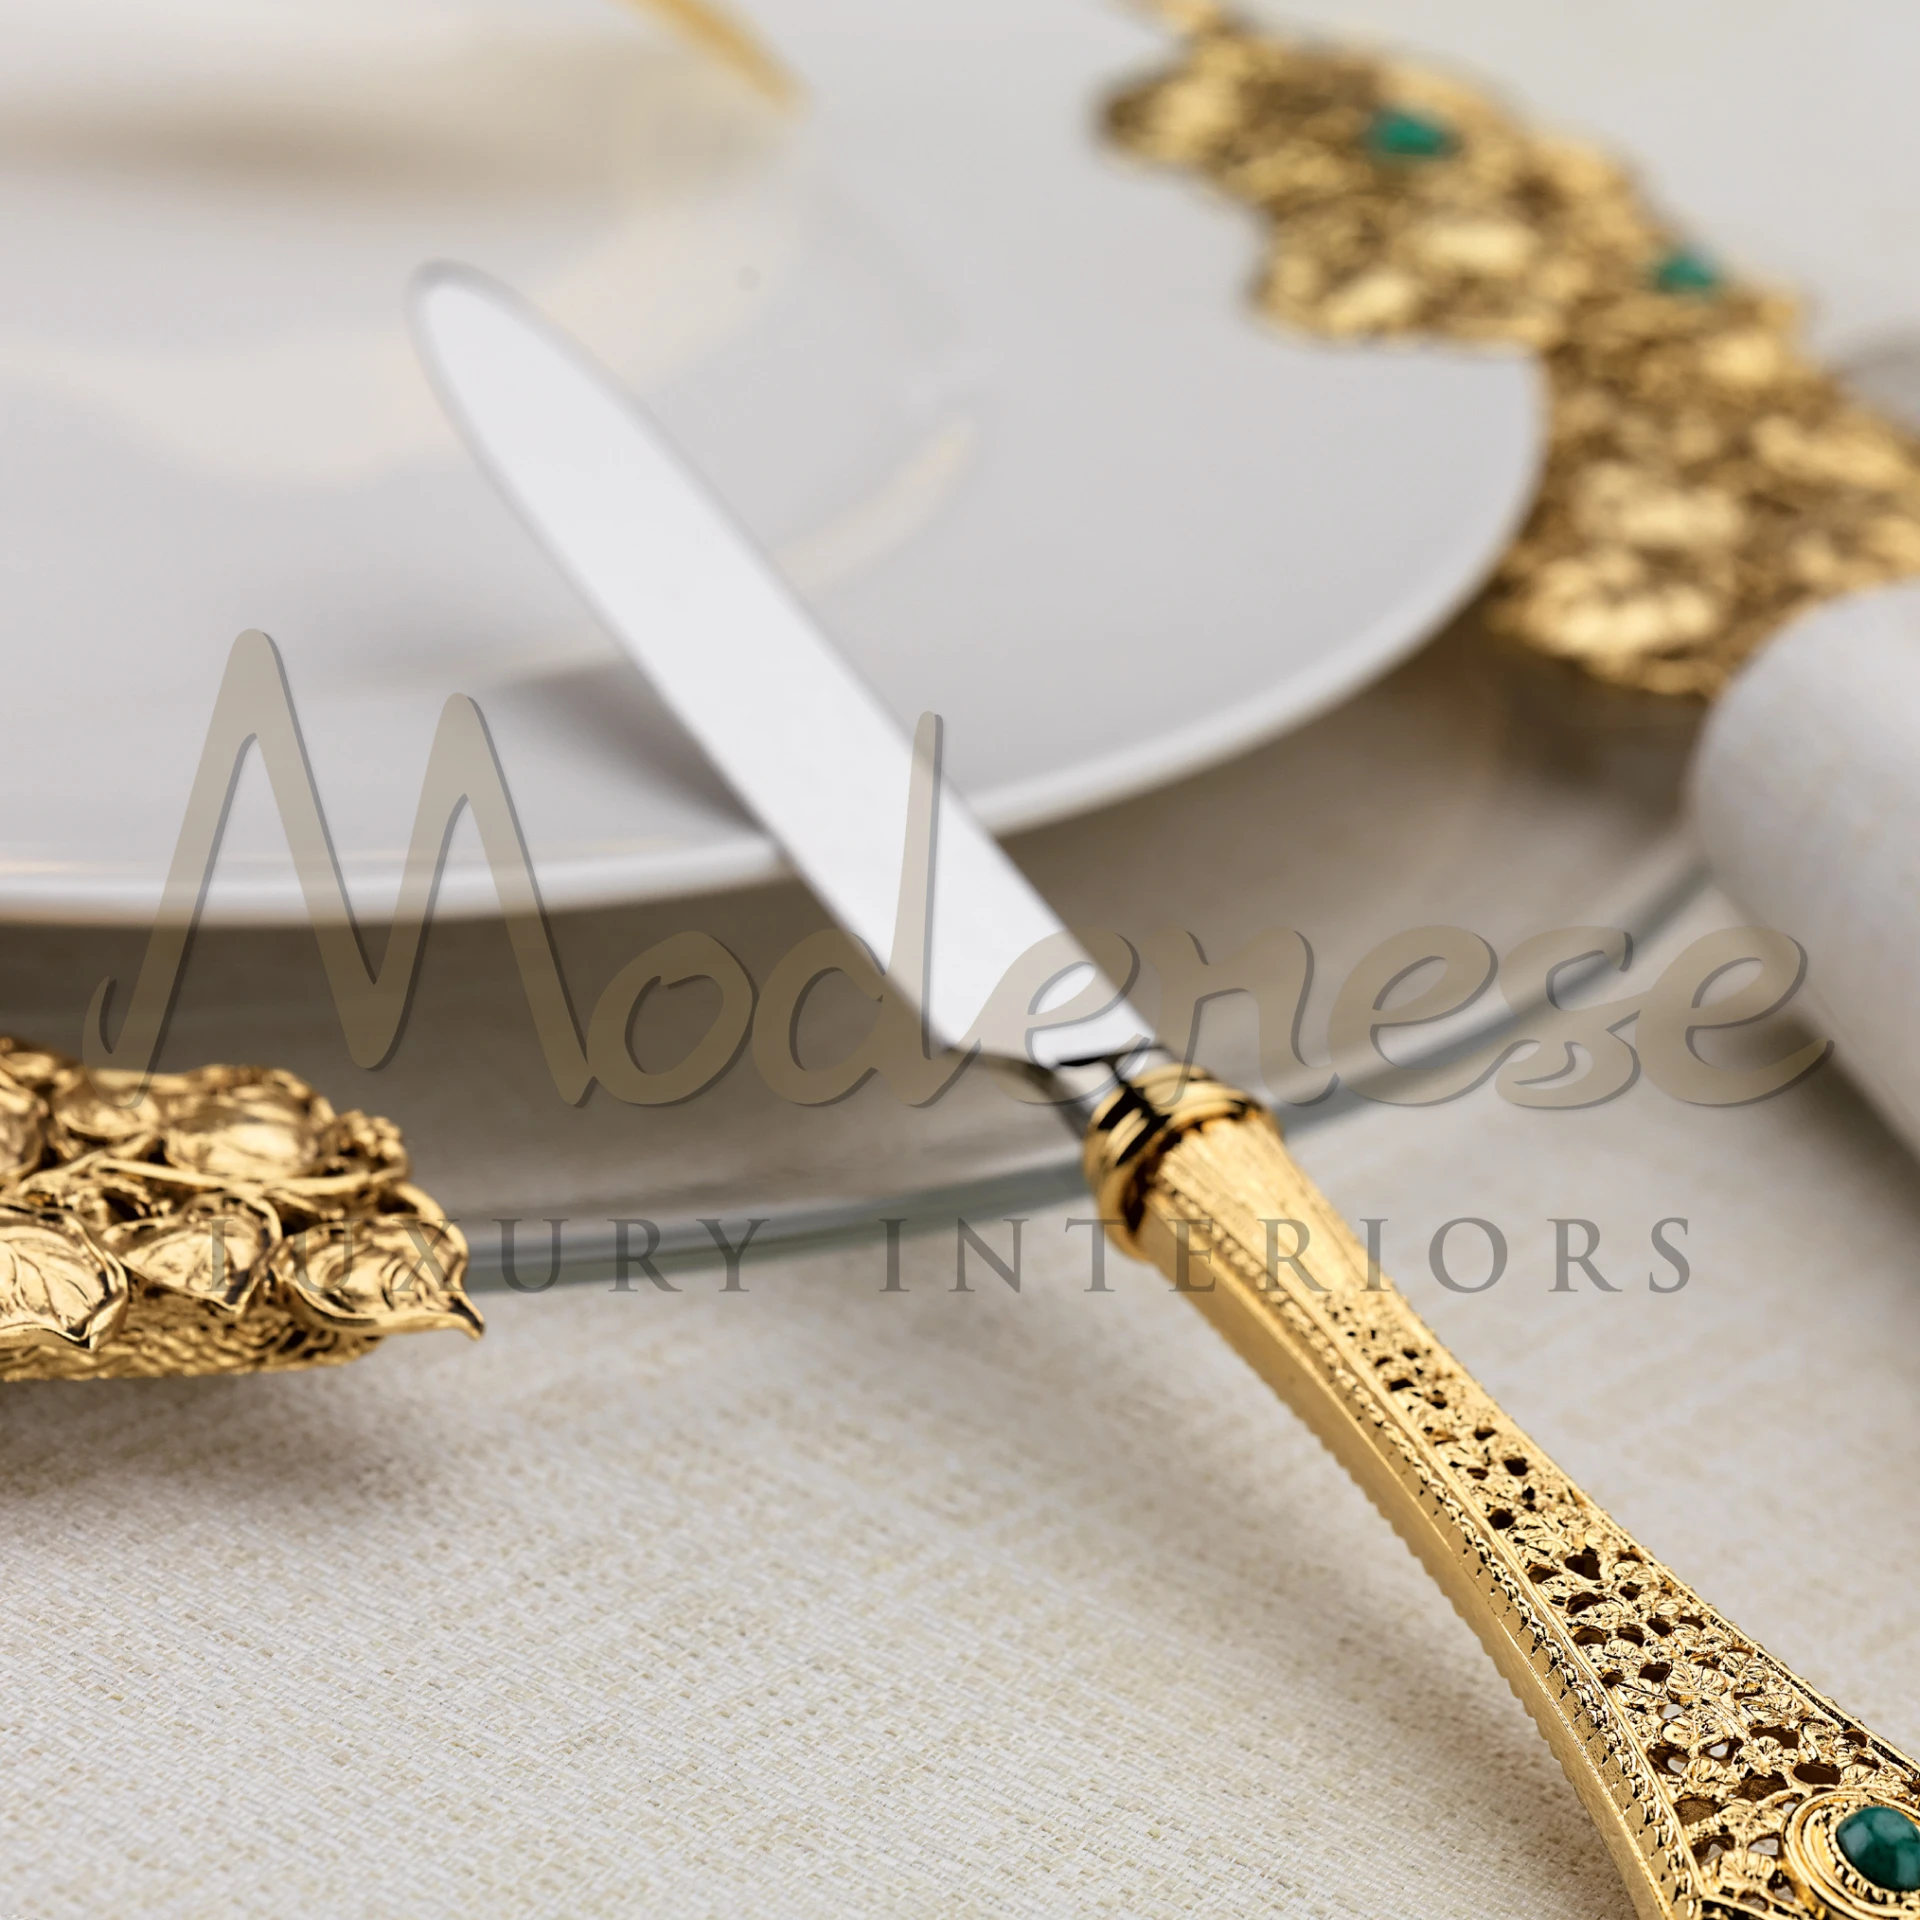 Close-up of a shiny gold knife handle with a pretty green gemstone, part of a fancy table arrangement with fancy plates.